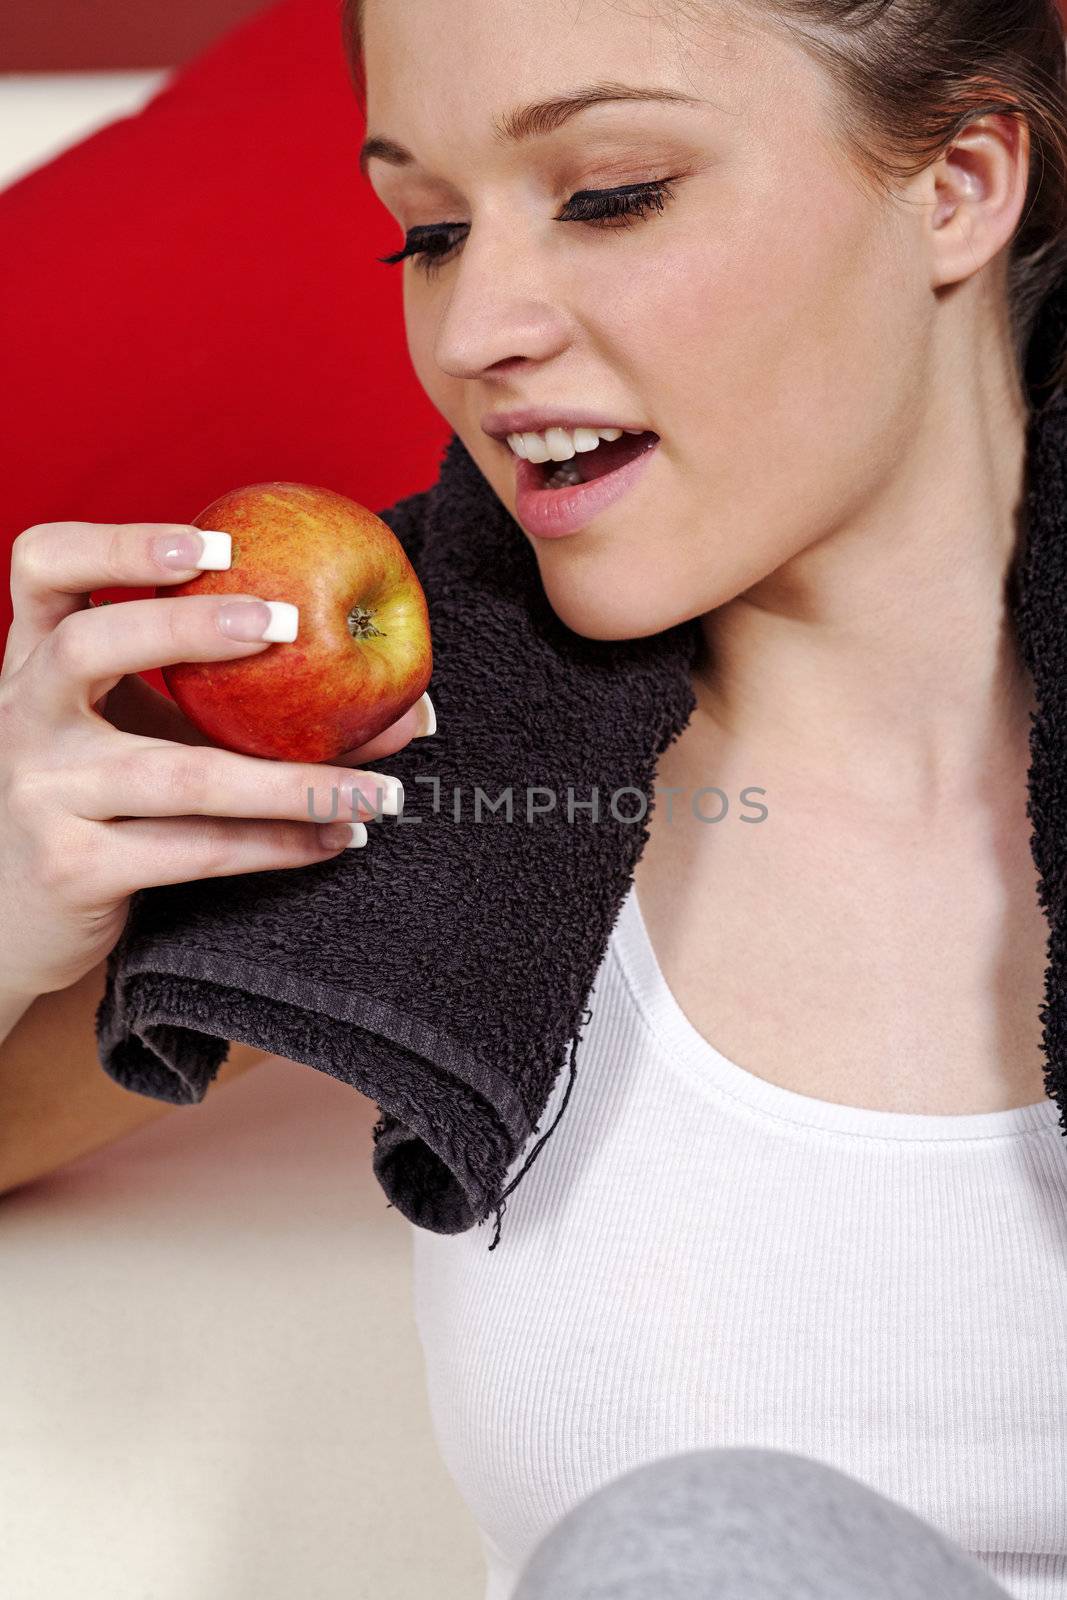 Young woman resting at home after exercise in fitness wear eating an apple